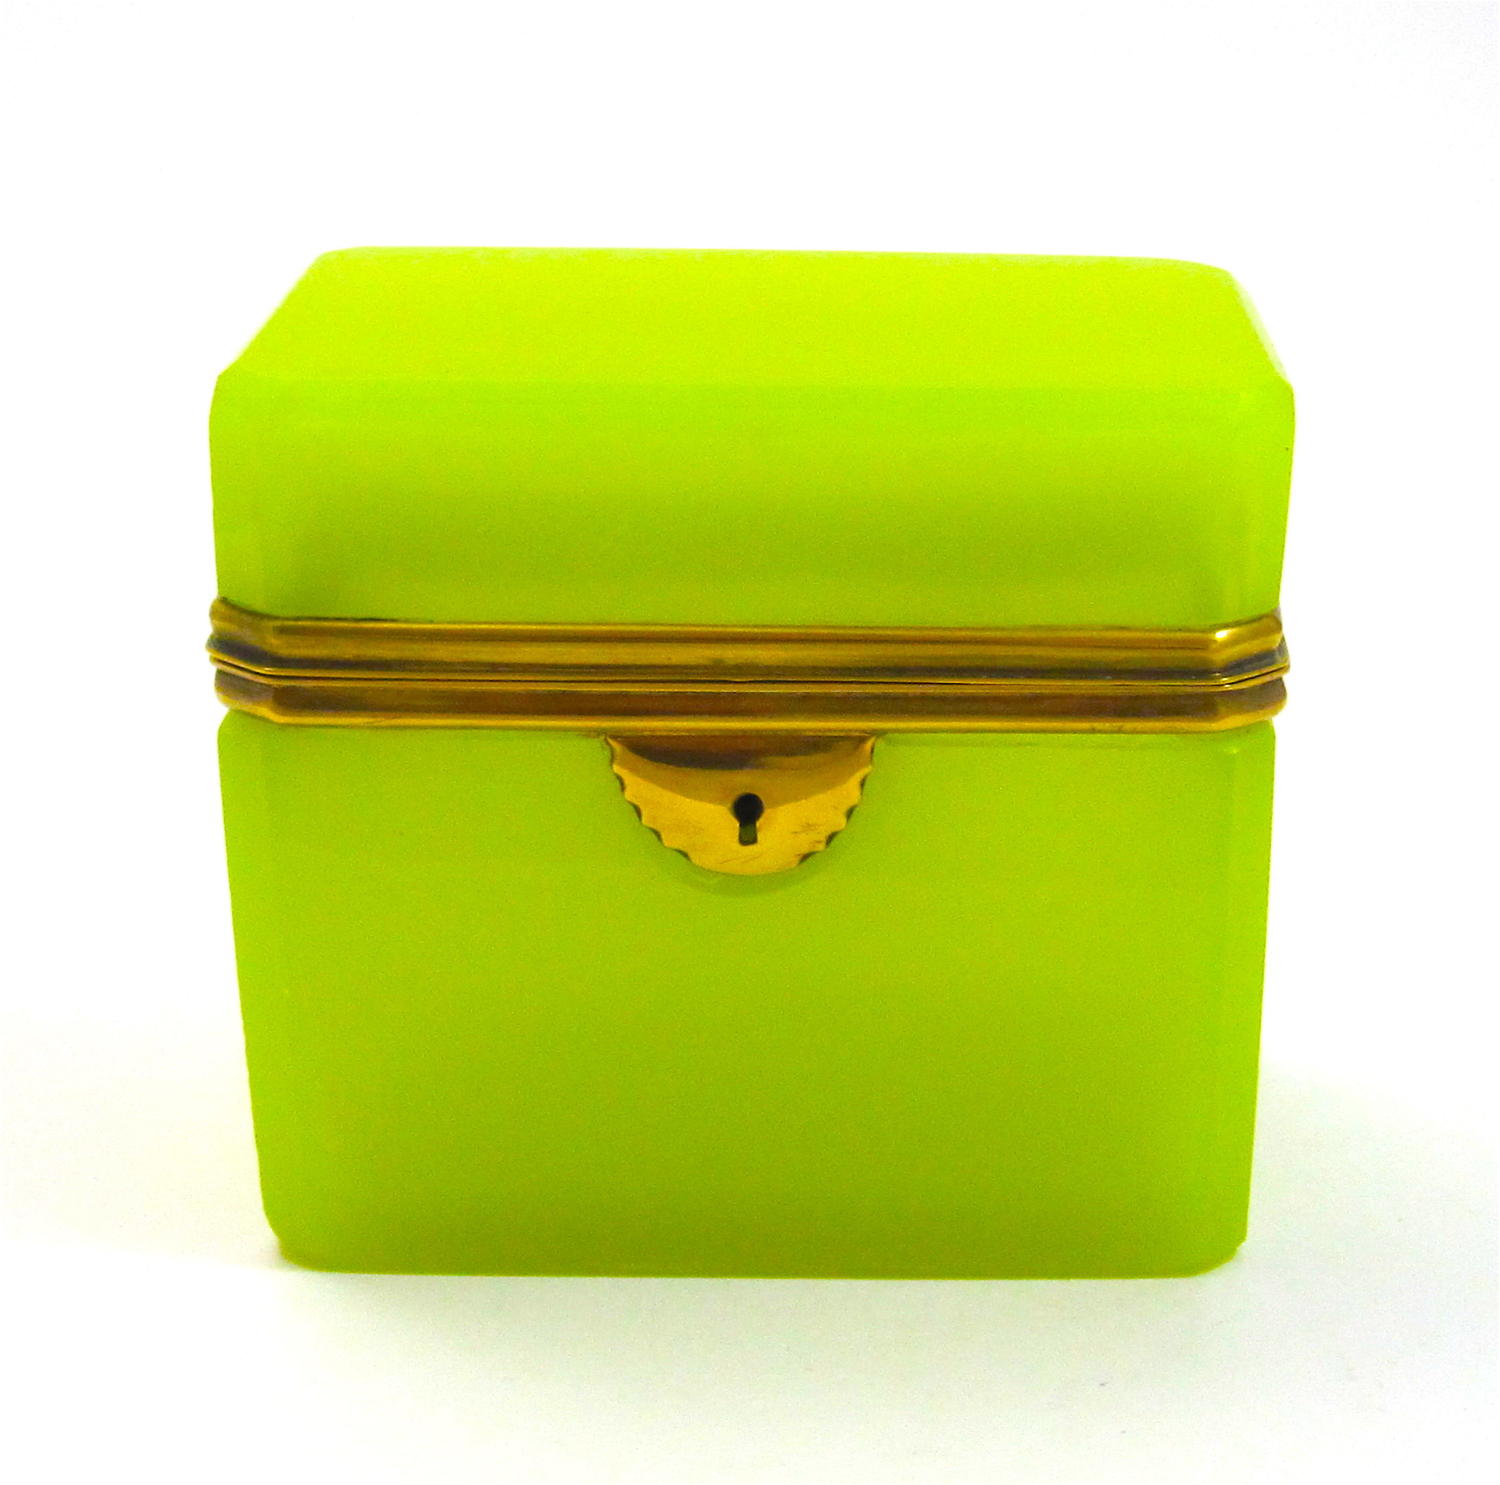 Antique Yellow Opaline Glass Casket Box with Clipped Corners. 